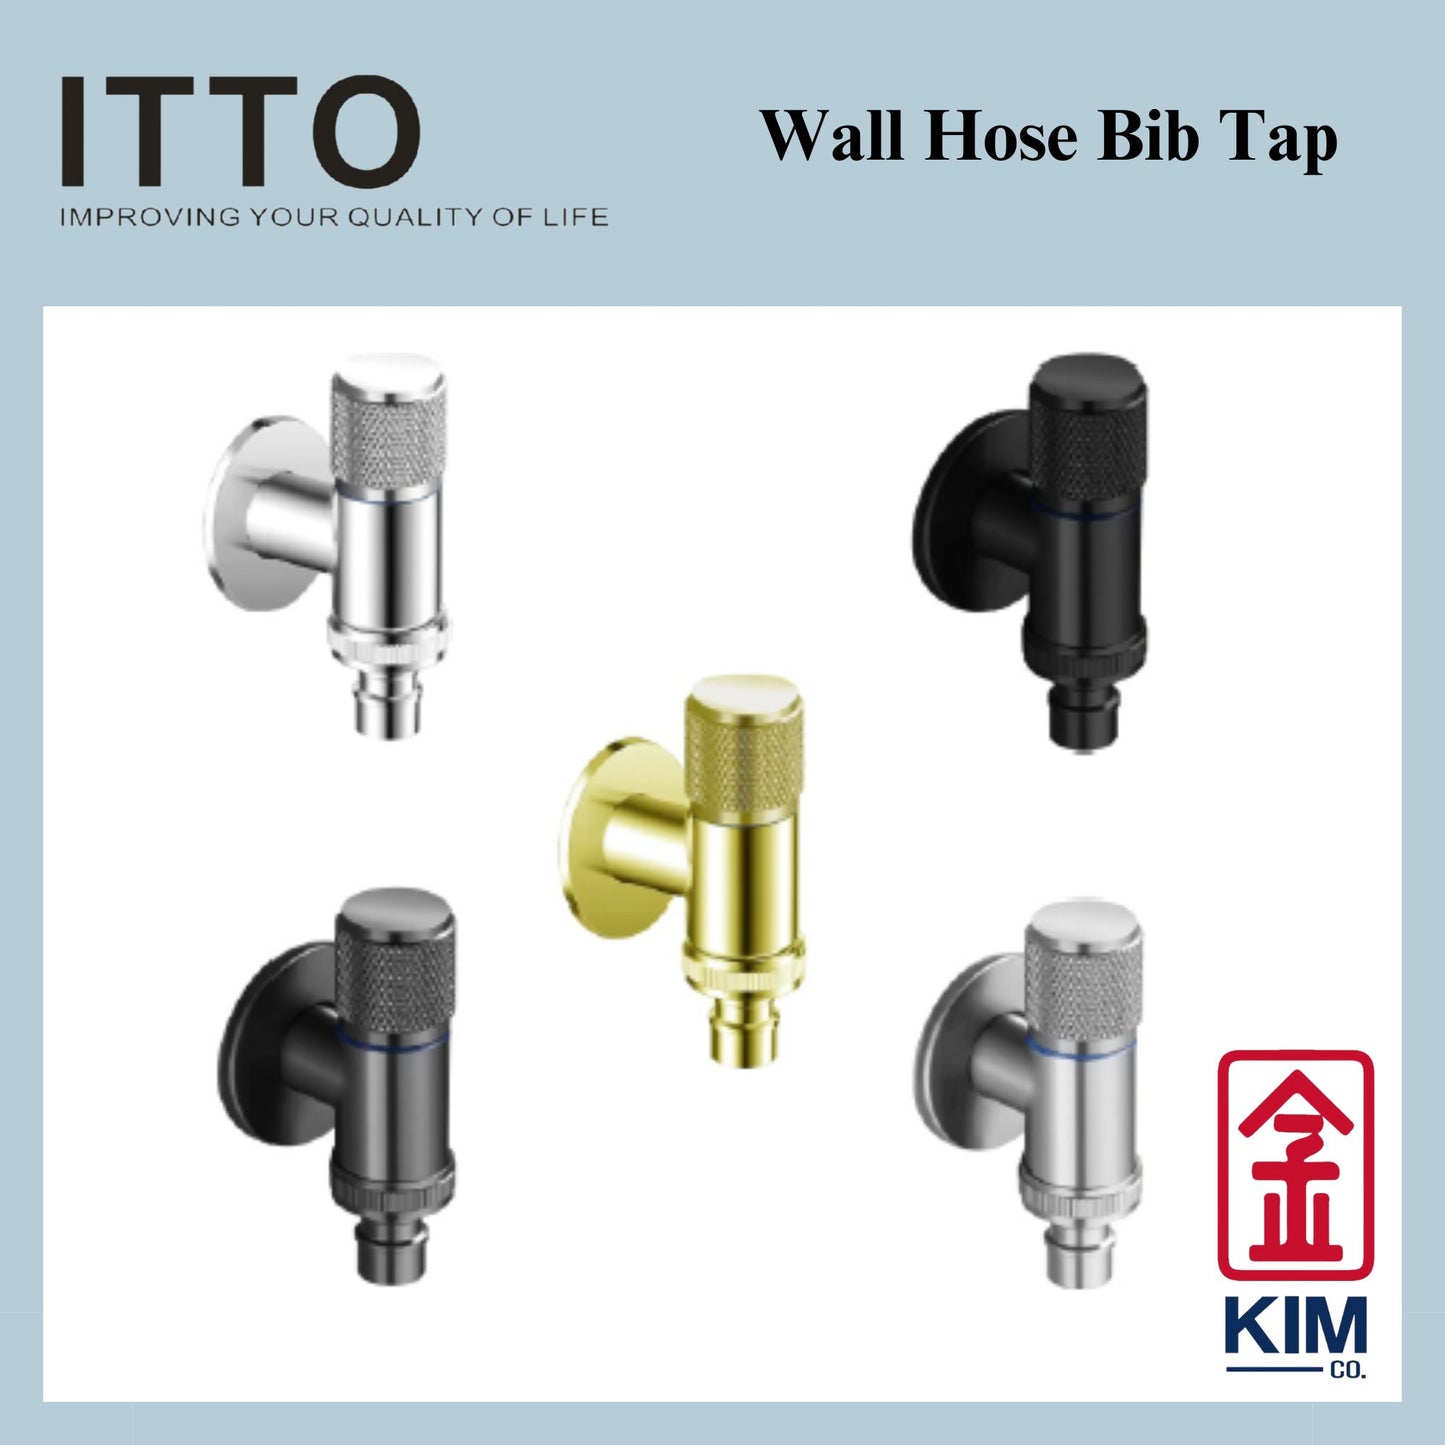 Itto Stainless Steel 304 Wall Hose Bib Tap